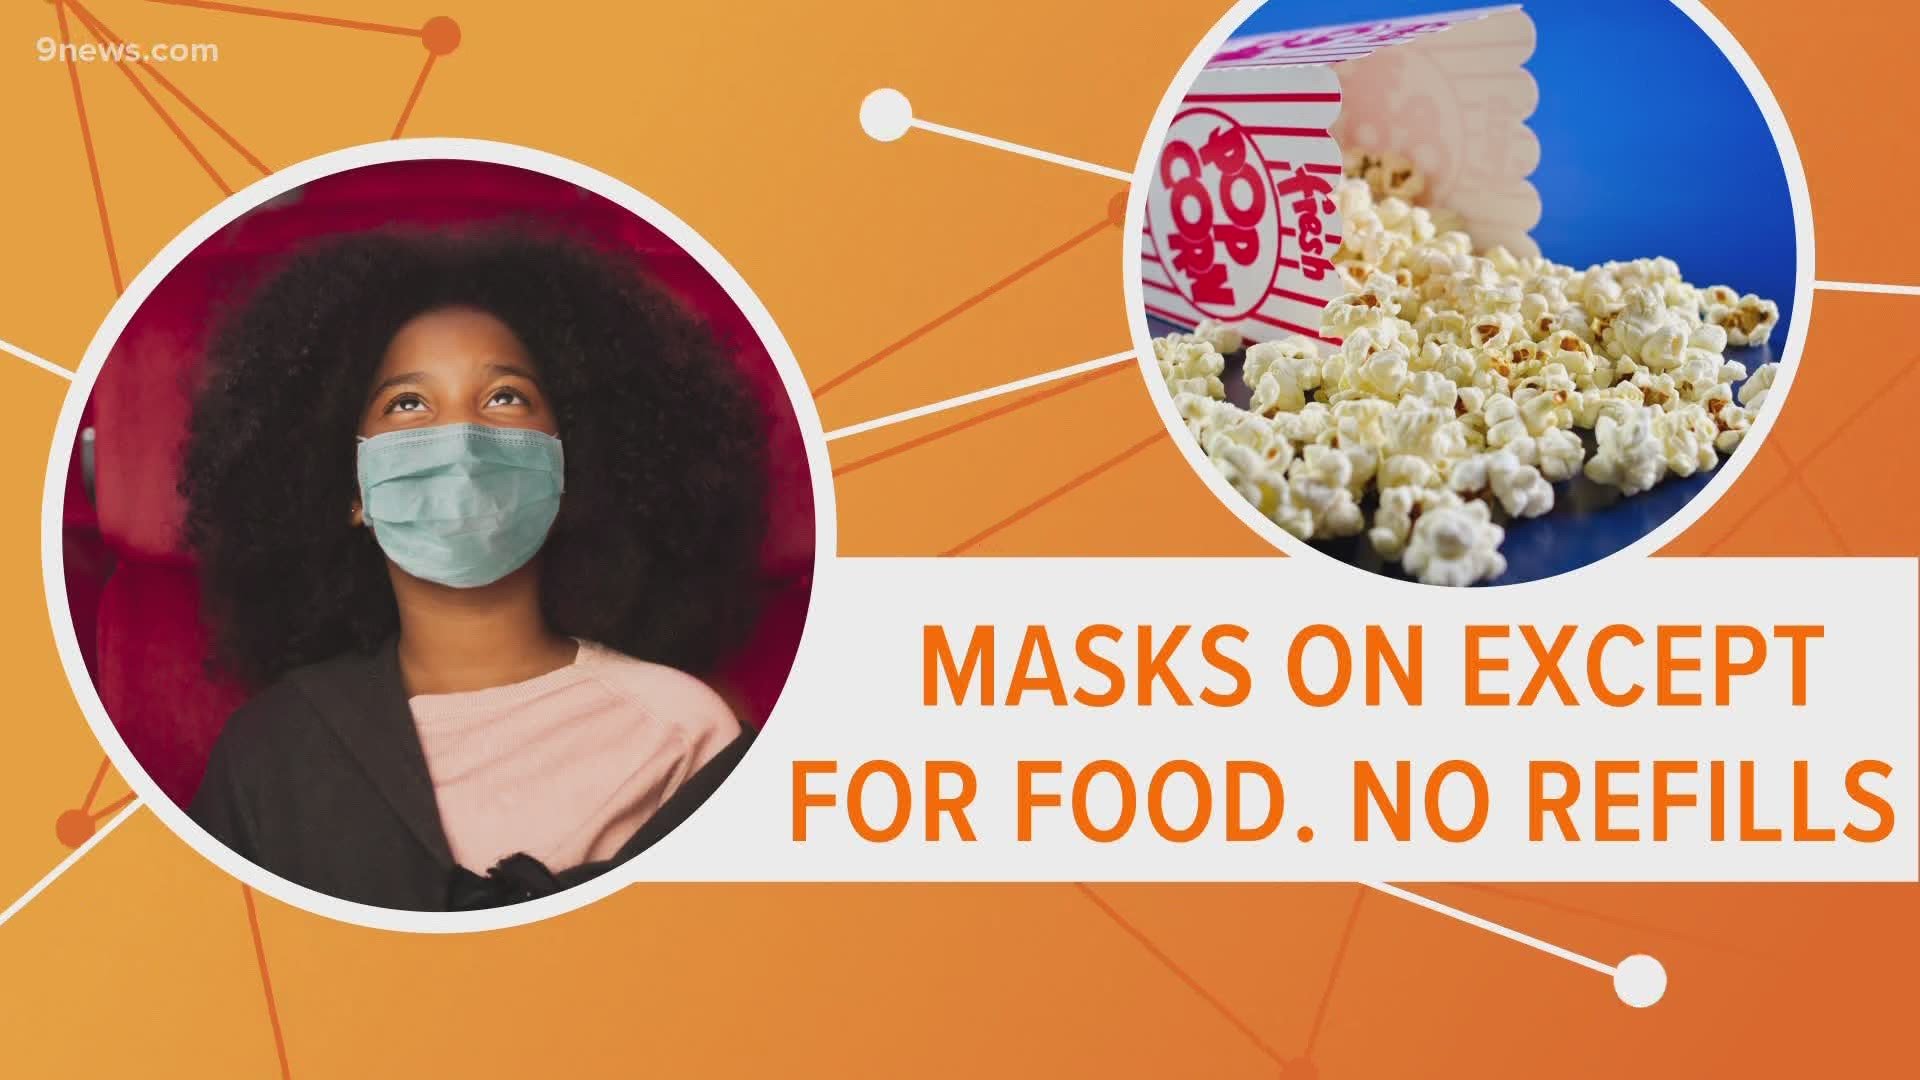 Keep that mask on at all times. AMC said it can be removed only if you're eating or drinking.